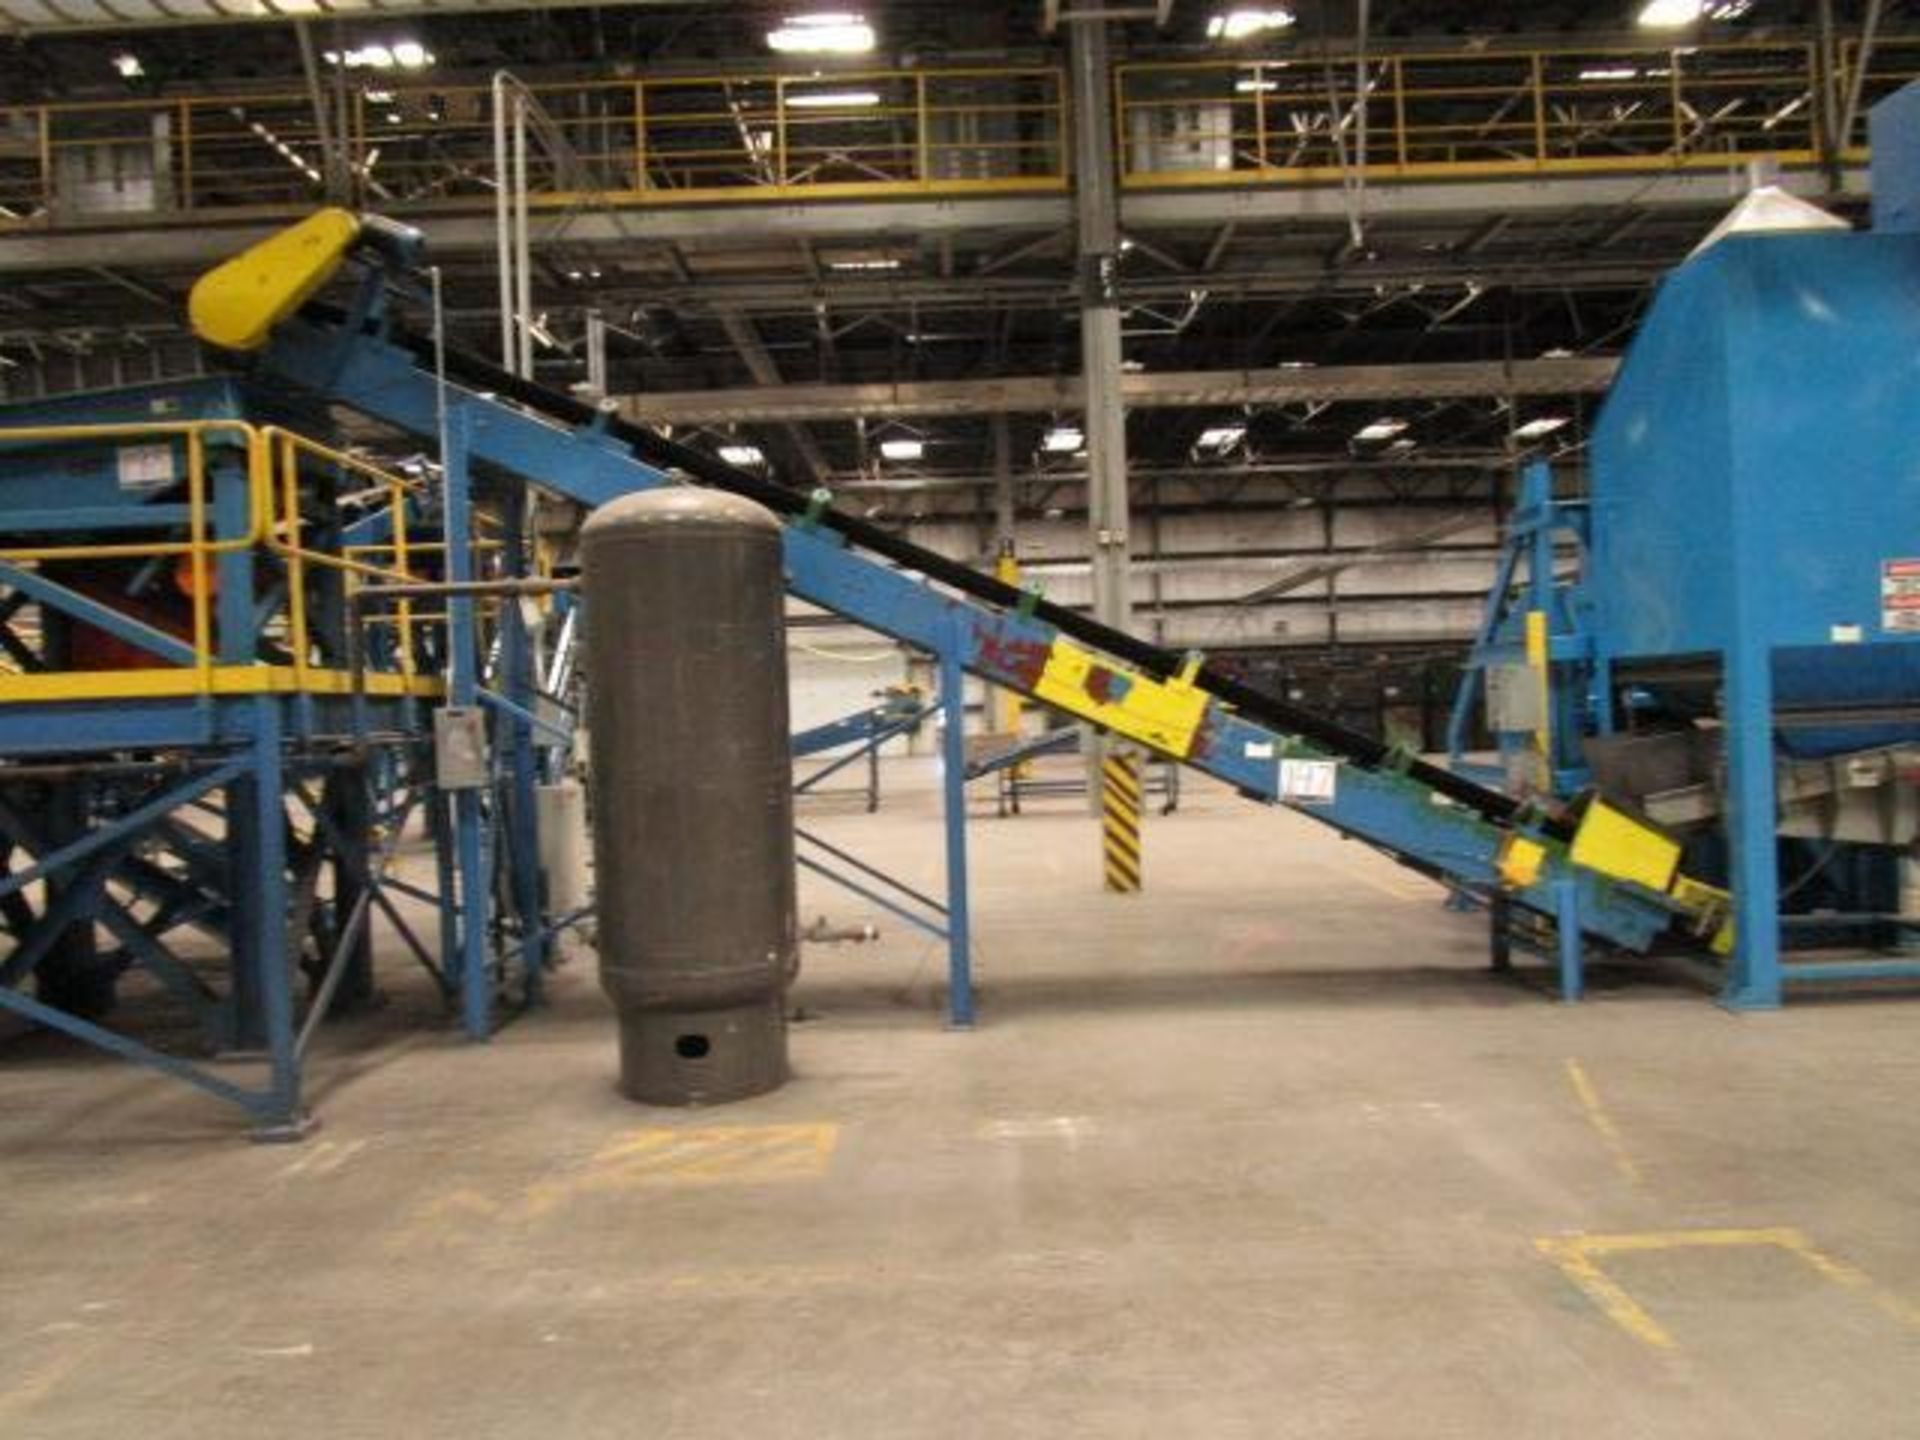 Inclined Belt Conveyer - Image 2 of 4